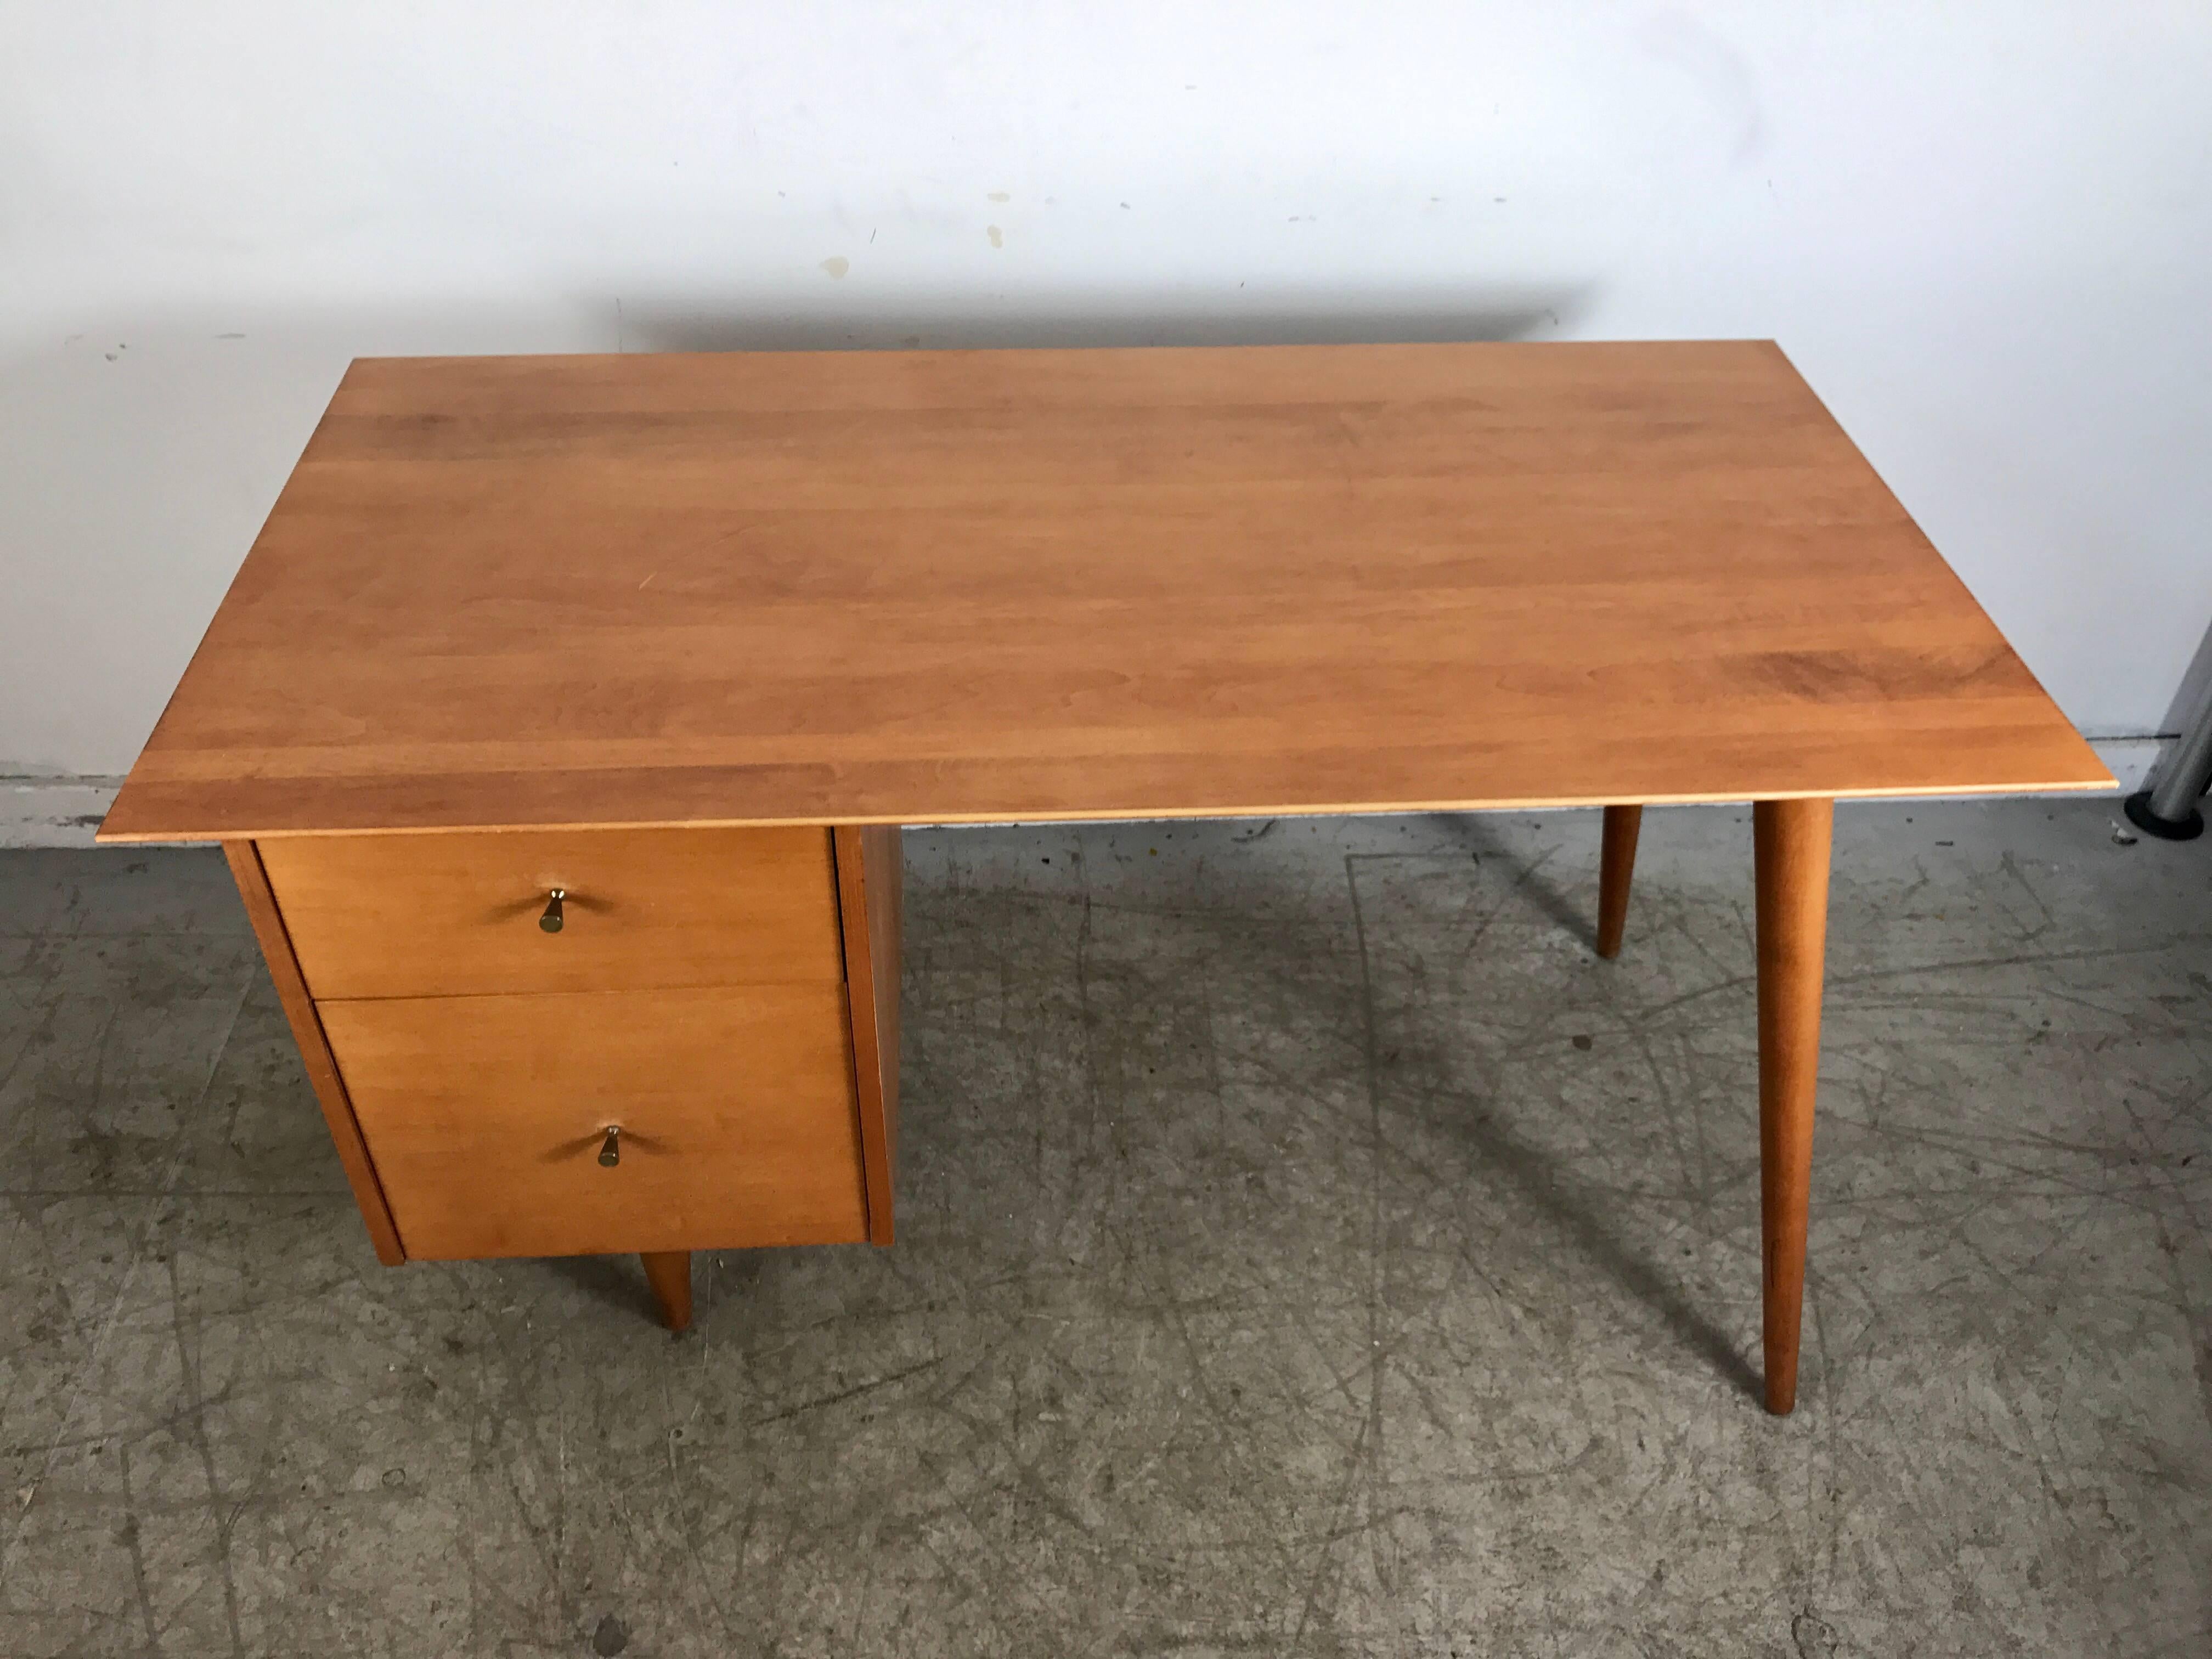 Classic Modernist desk by Paul McCobb, stunning blonde birchwood desk, two drawers on left, file drawer, original brass conical drawer pulls, hand delivery avail to New York City or anywhere en route from Buffalo NY.